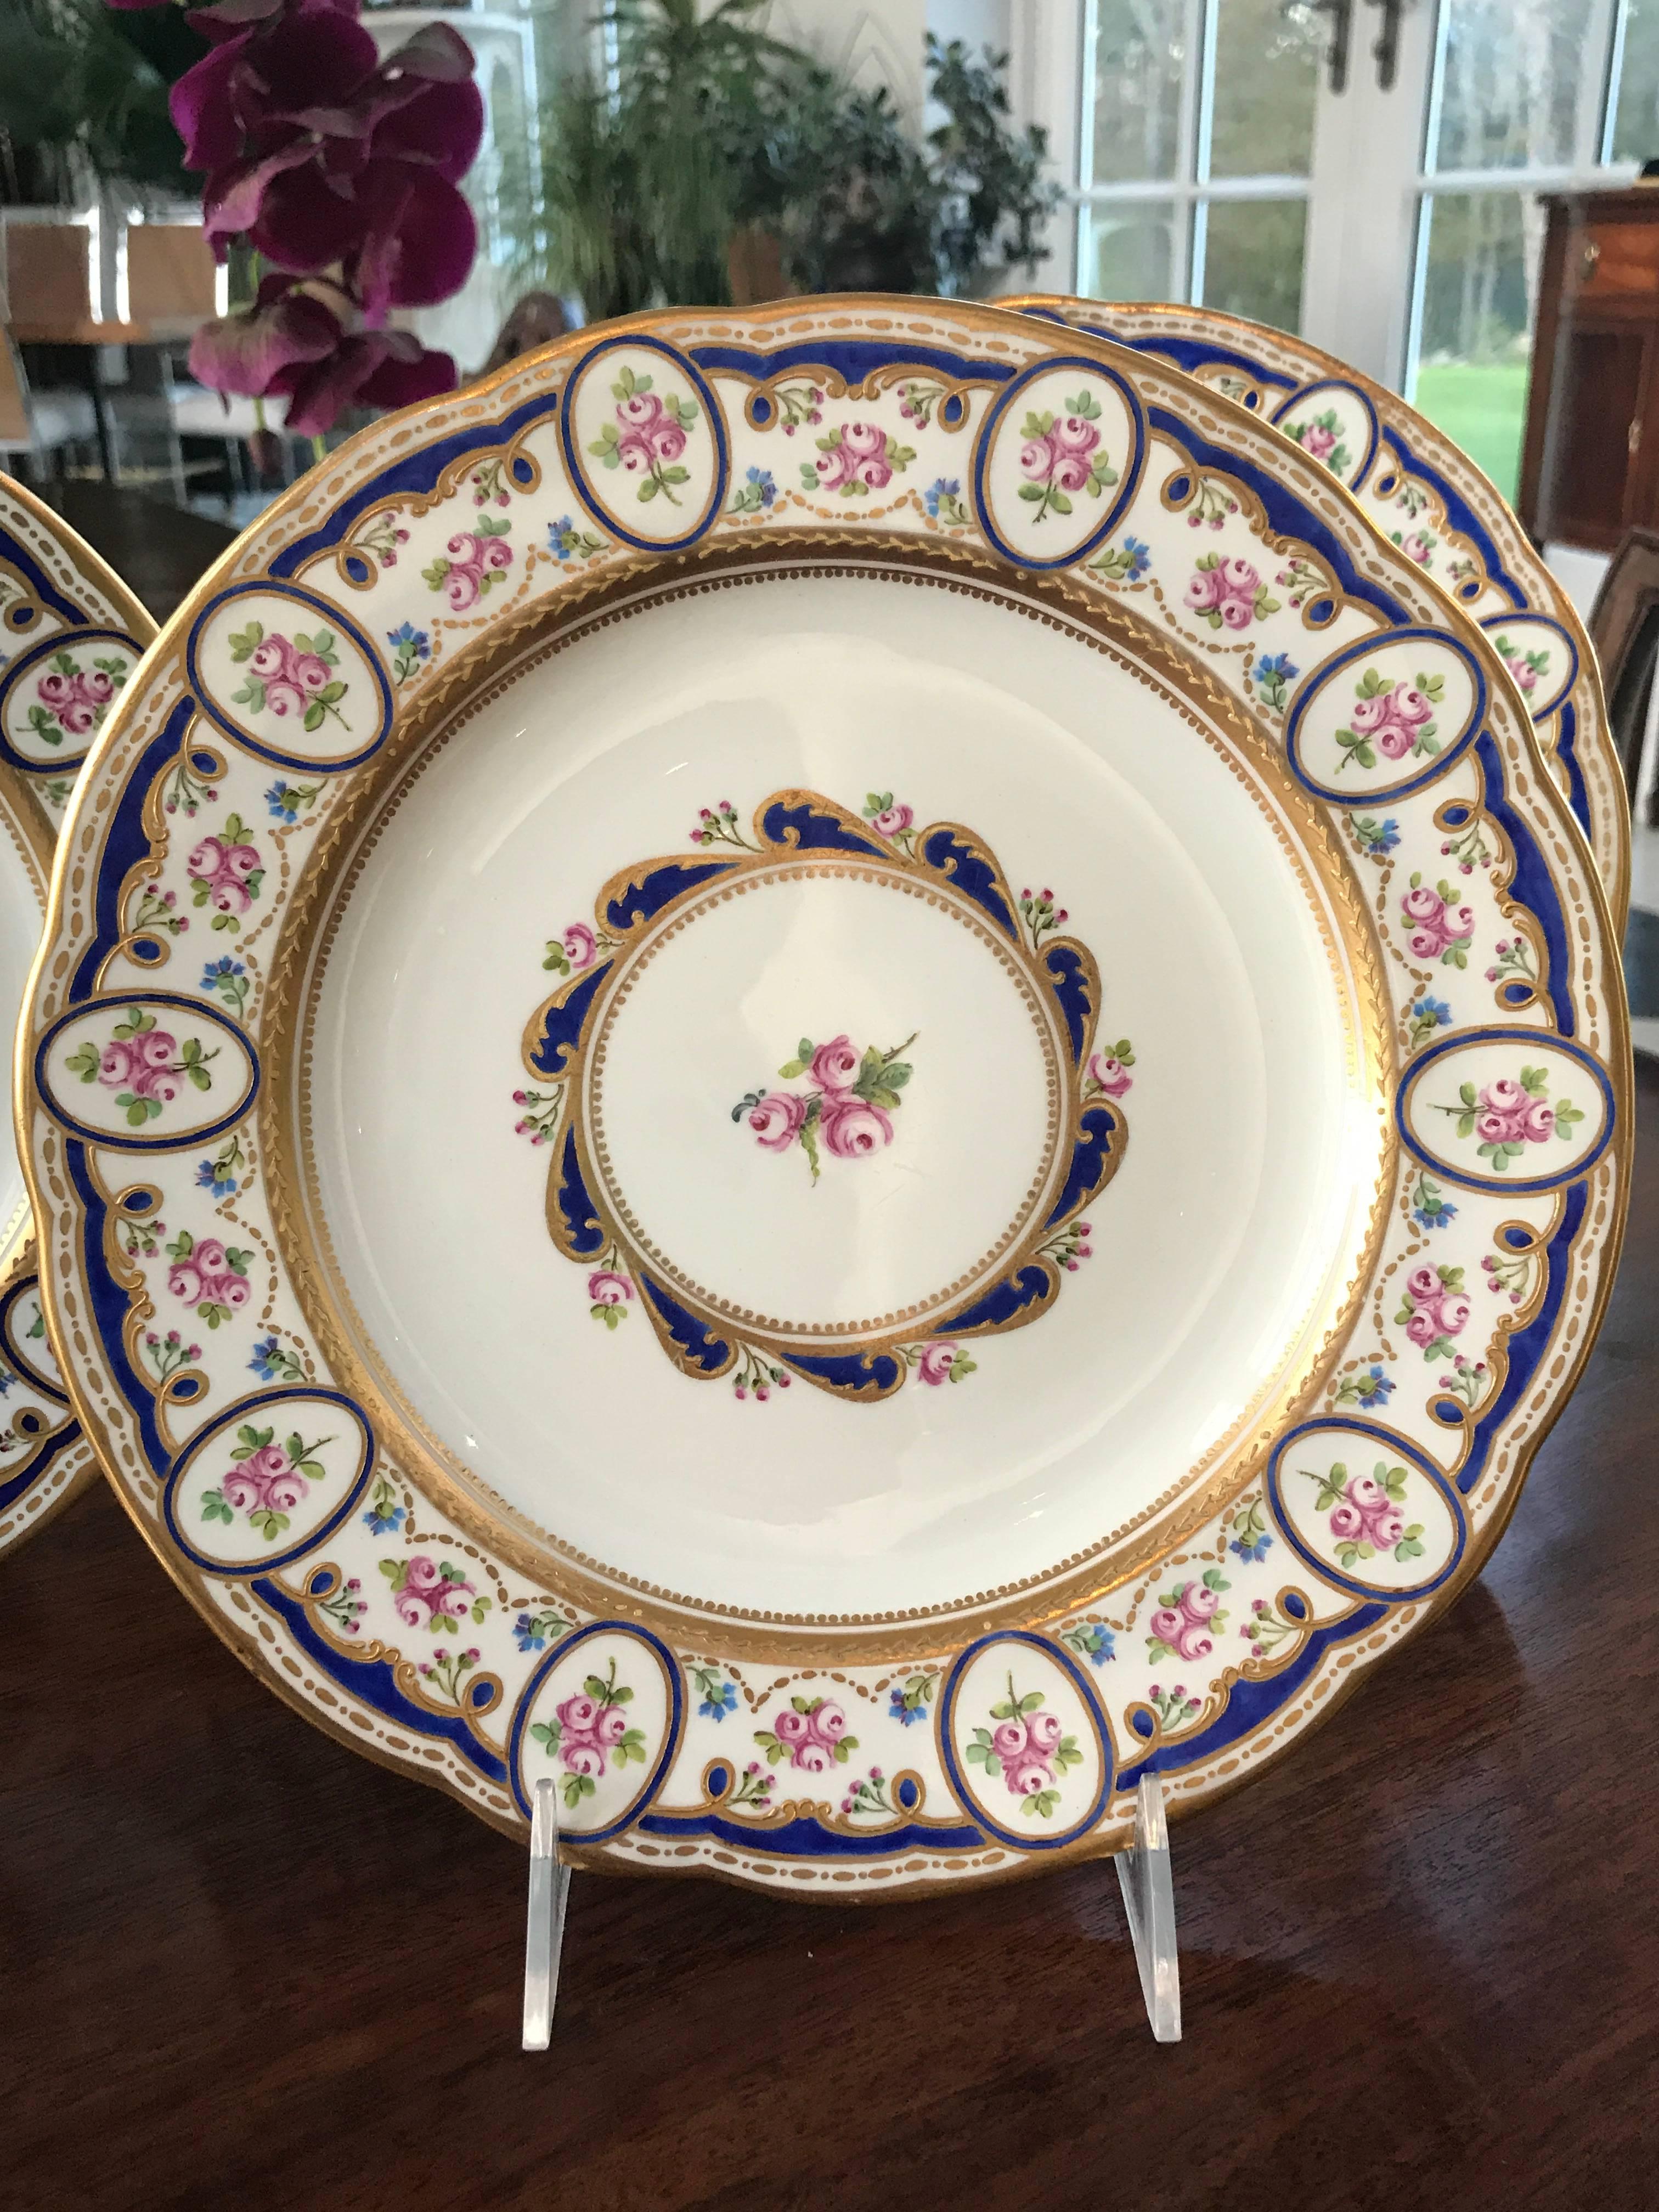 This gorgeous Set of 12 Porcelain Dinner Plates was custom created by Wedgwood in 1900 to match a pattern identical to ones of Sèvres. 
(We have a set of six of such plates by Sèvres)
These hand painted plates have pink roses and blue corn flowers